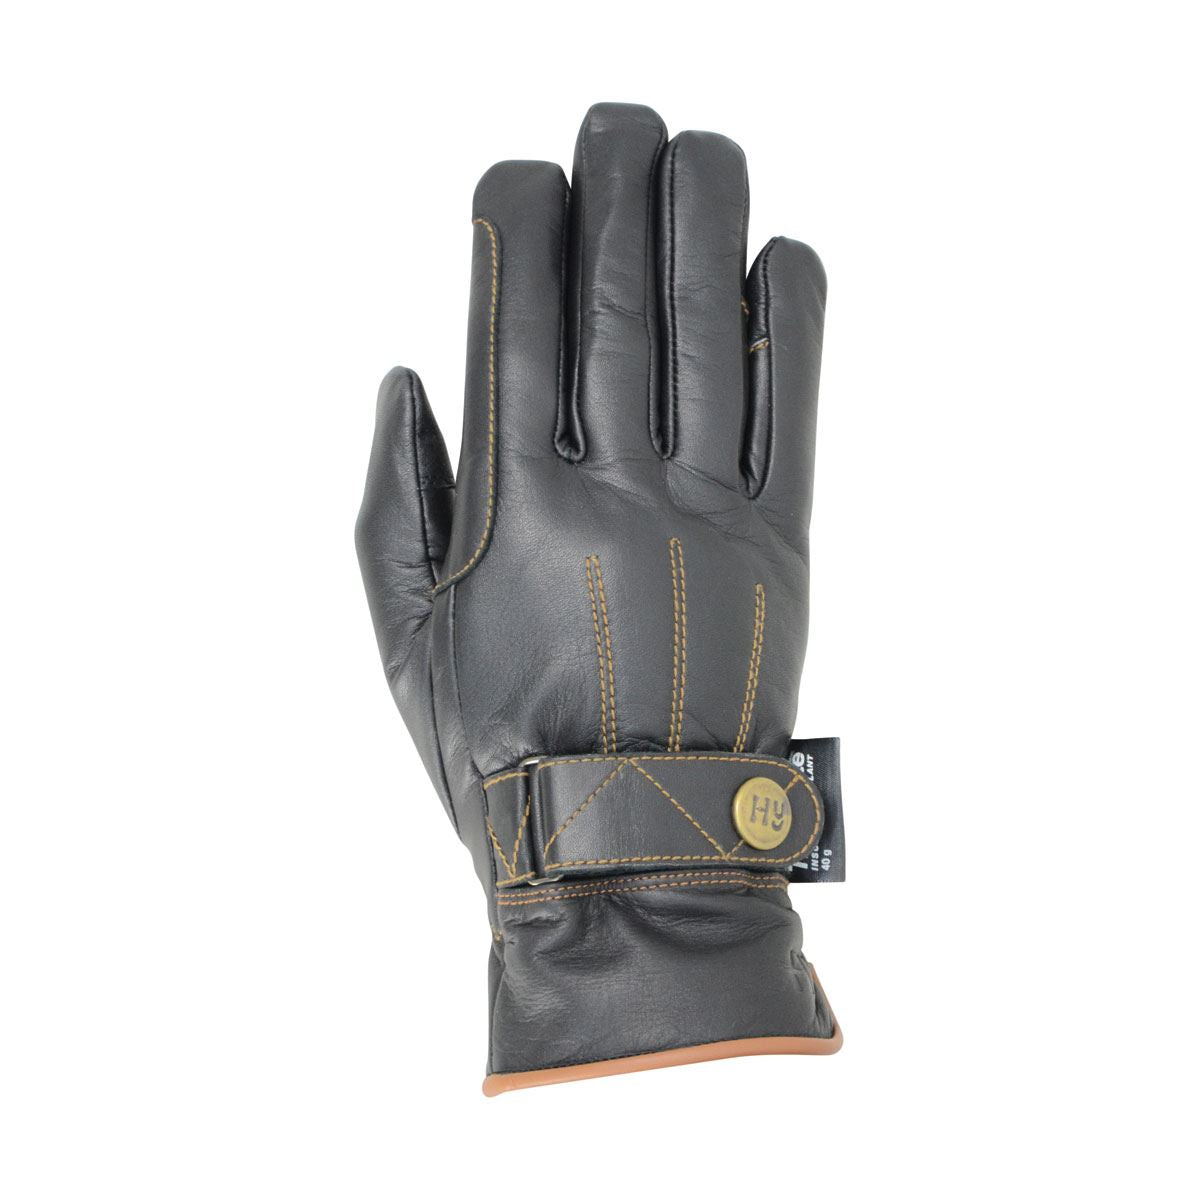 Hy Equestrian Thinsulate Leather Winter Riding Gloves - Just Horse Riders